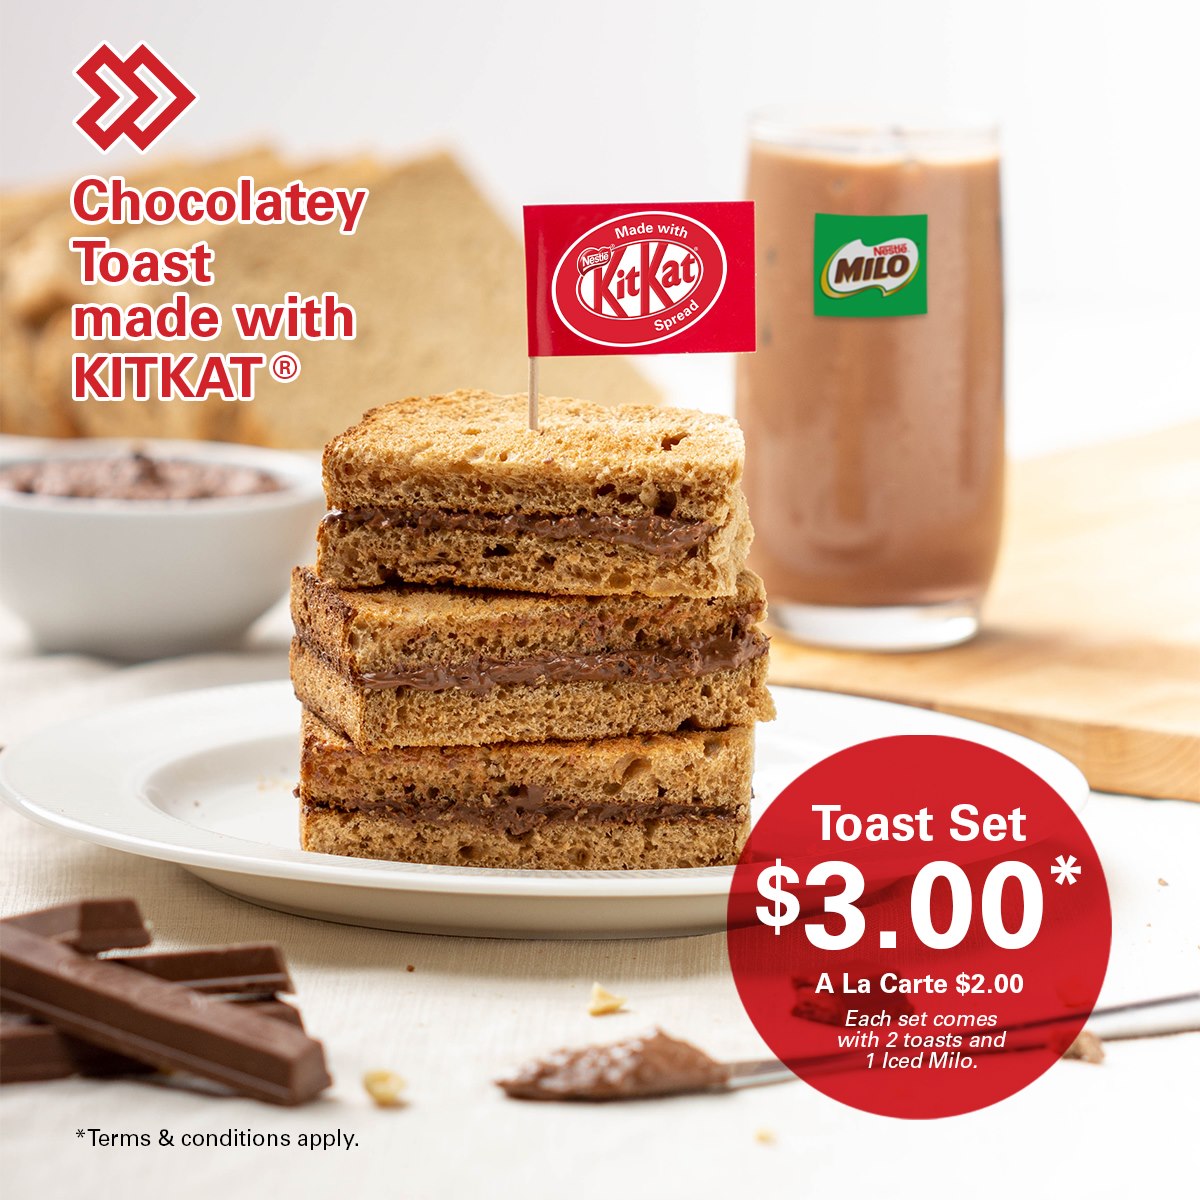 Kopitiam & Foodfare outlets has KitKat Toast from now till 30 Sep 21 - 1